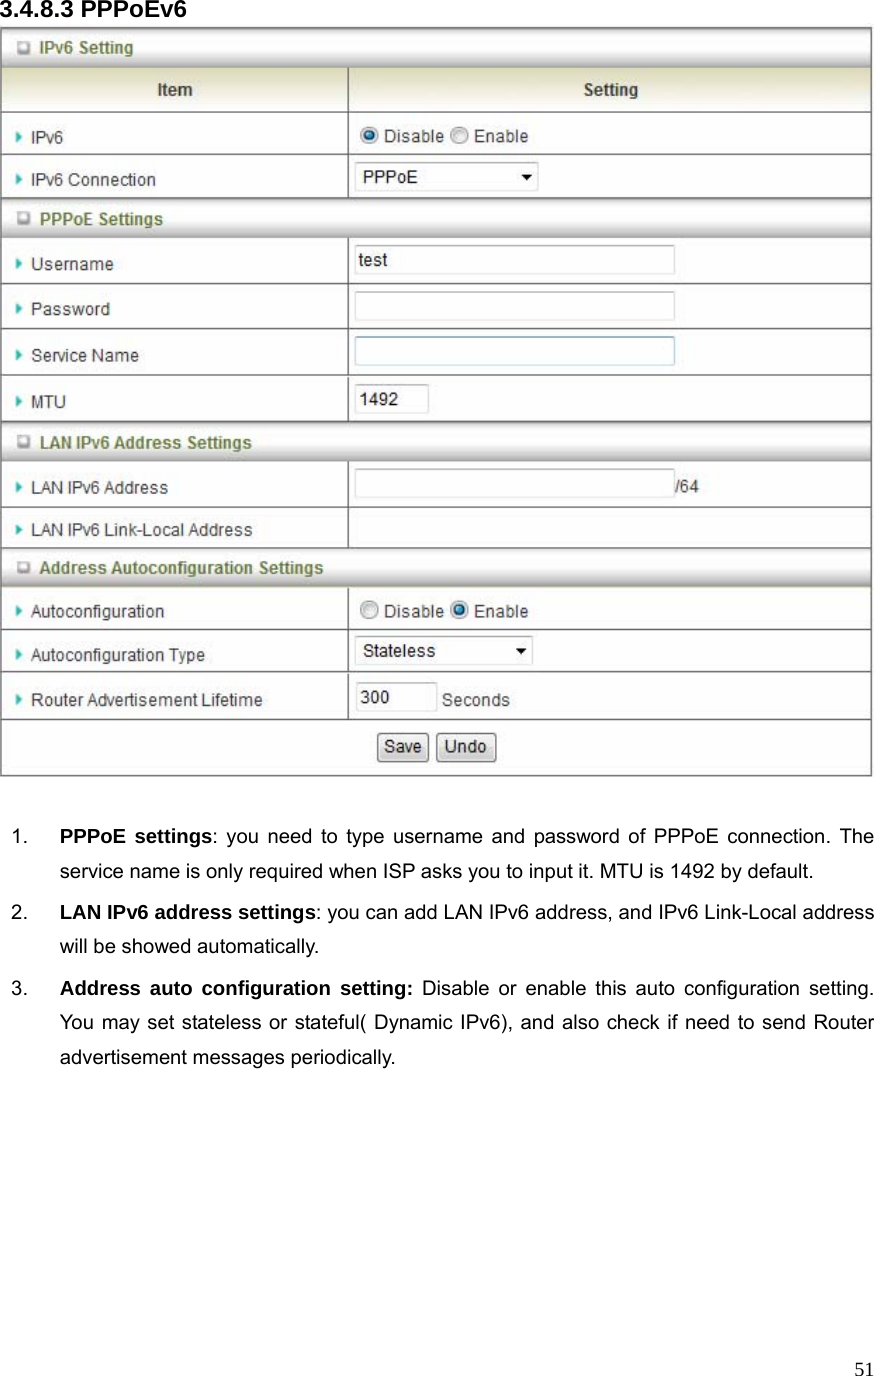  513.4.8.3 PPPoEv6   1.  PPPoE settings: you need to type username and password of PPPoE connection. The service name is only required when ISP asks you to input it. MTU is 1492 by default.   2.  LAN IPv6 address settings: you can add LAN IPv6 address, and IPv6 Link-Local address will be showed automatically. 3.  Address auto configuration setting: Disable or enable this auto configuration setting. You may set stateless or stateful( Dynamic IPv6), and also check if need to send Router advertisement messages periodically.       